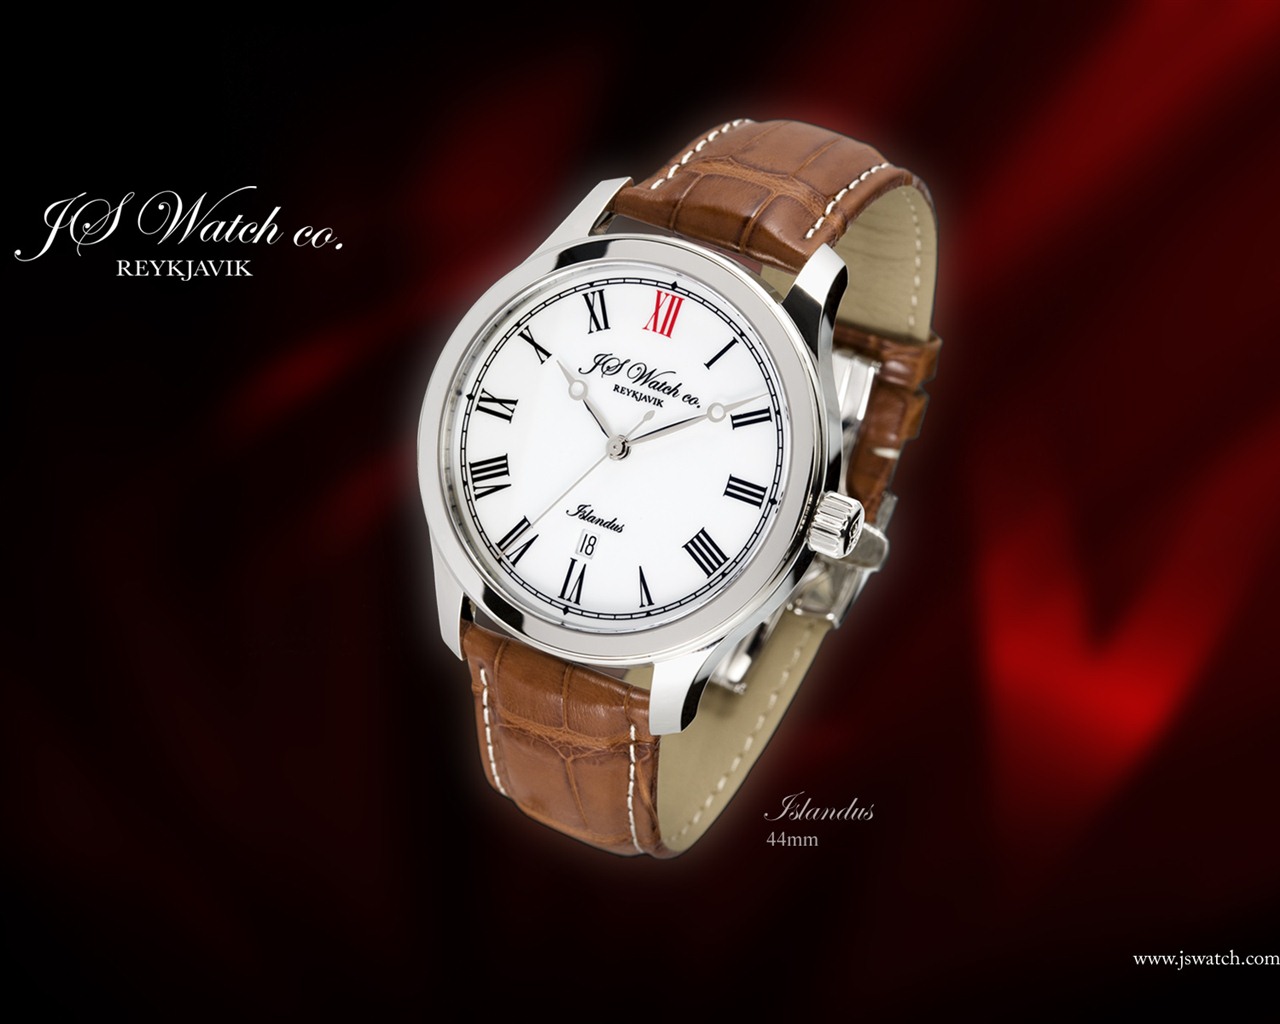 World famous watches wallpapers (2) #1 - 1280x1024